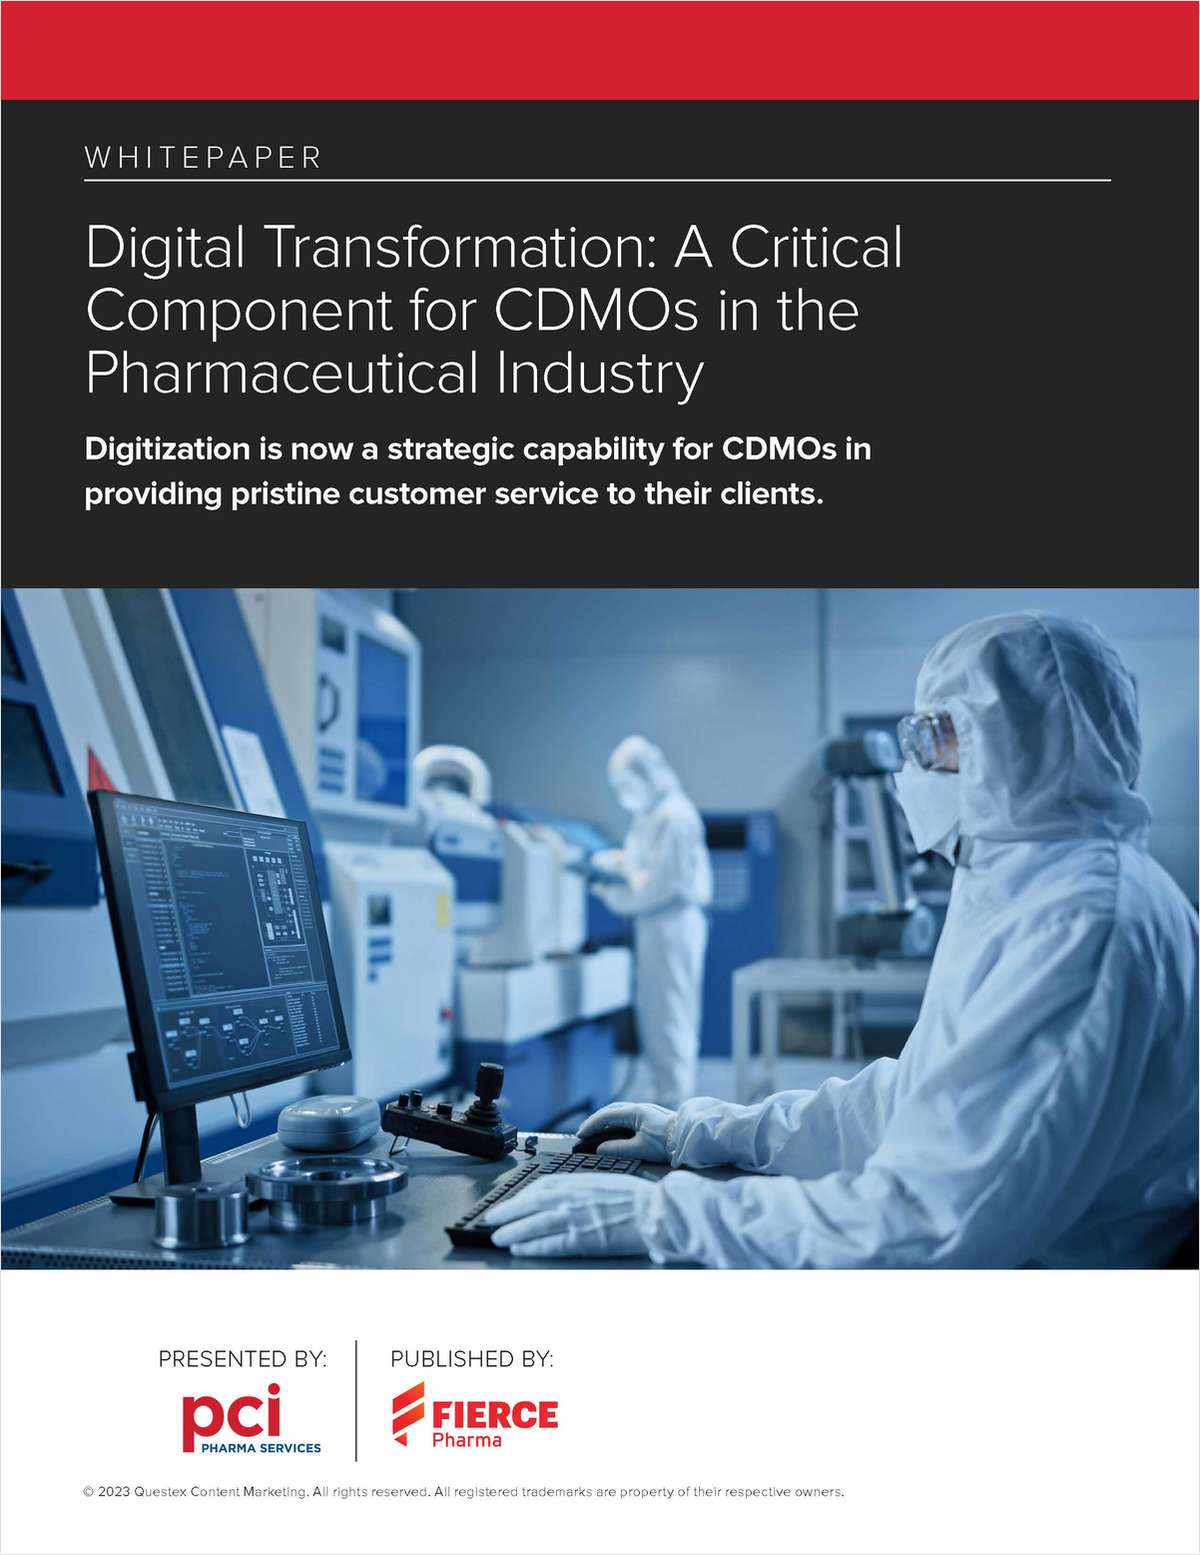 Digital Transformation: A Critical Component for CDMOs in the Pharmaceutical Industry